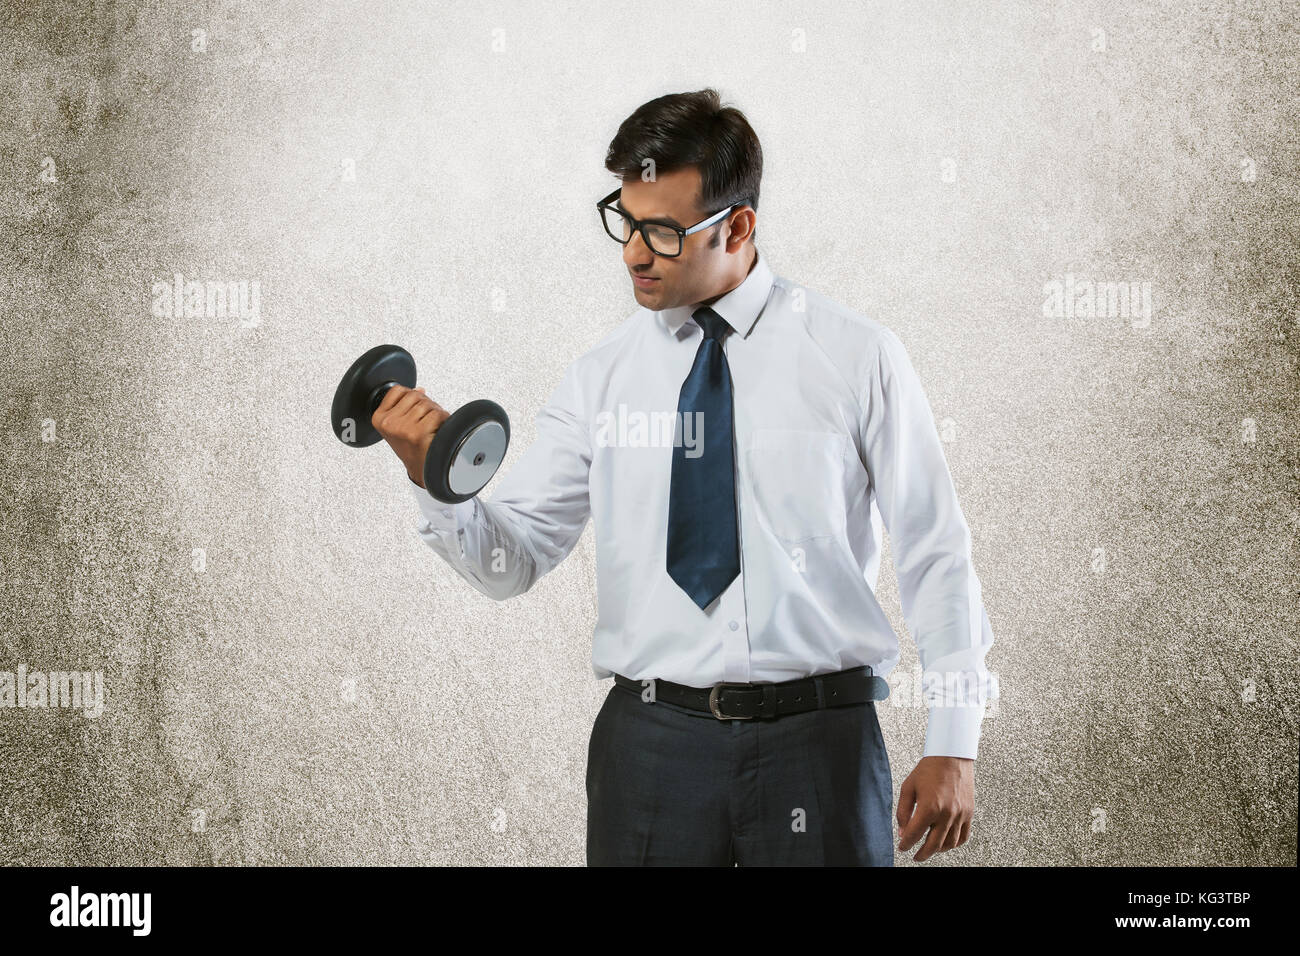 Young businessman lifting weights Stock Photo